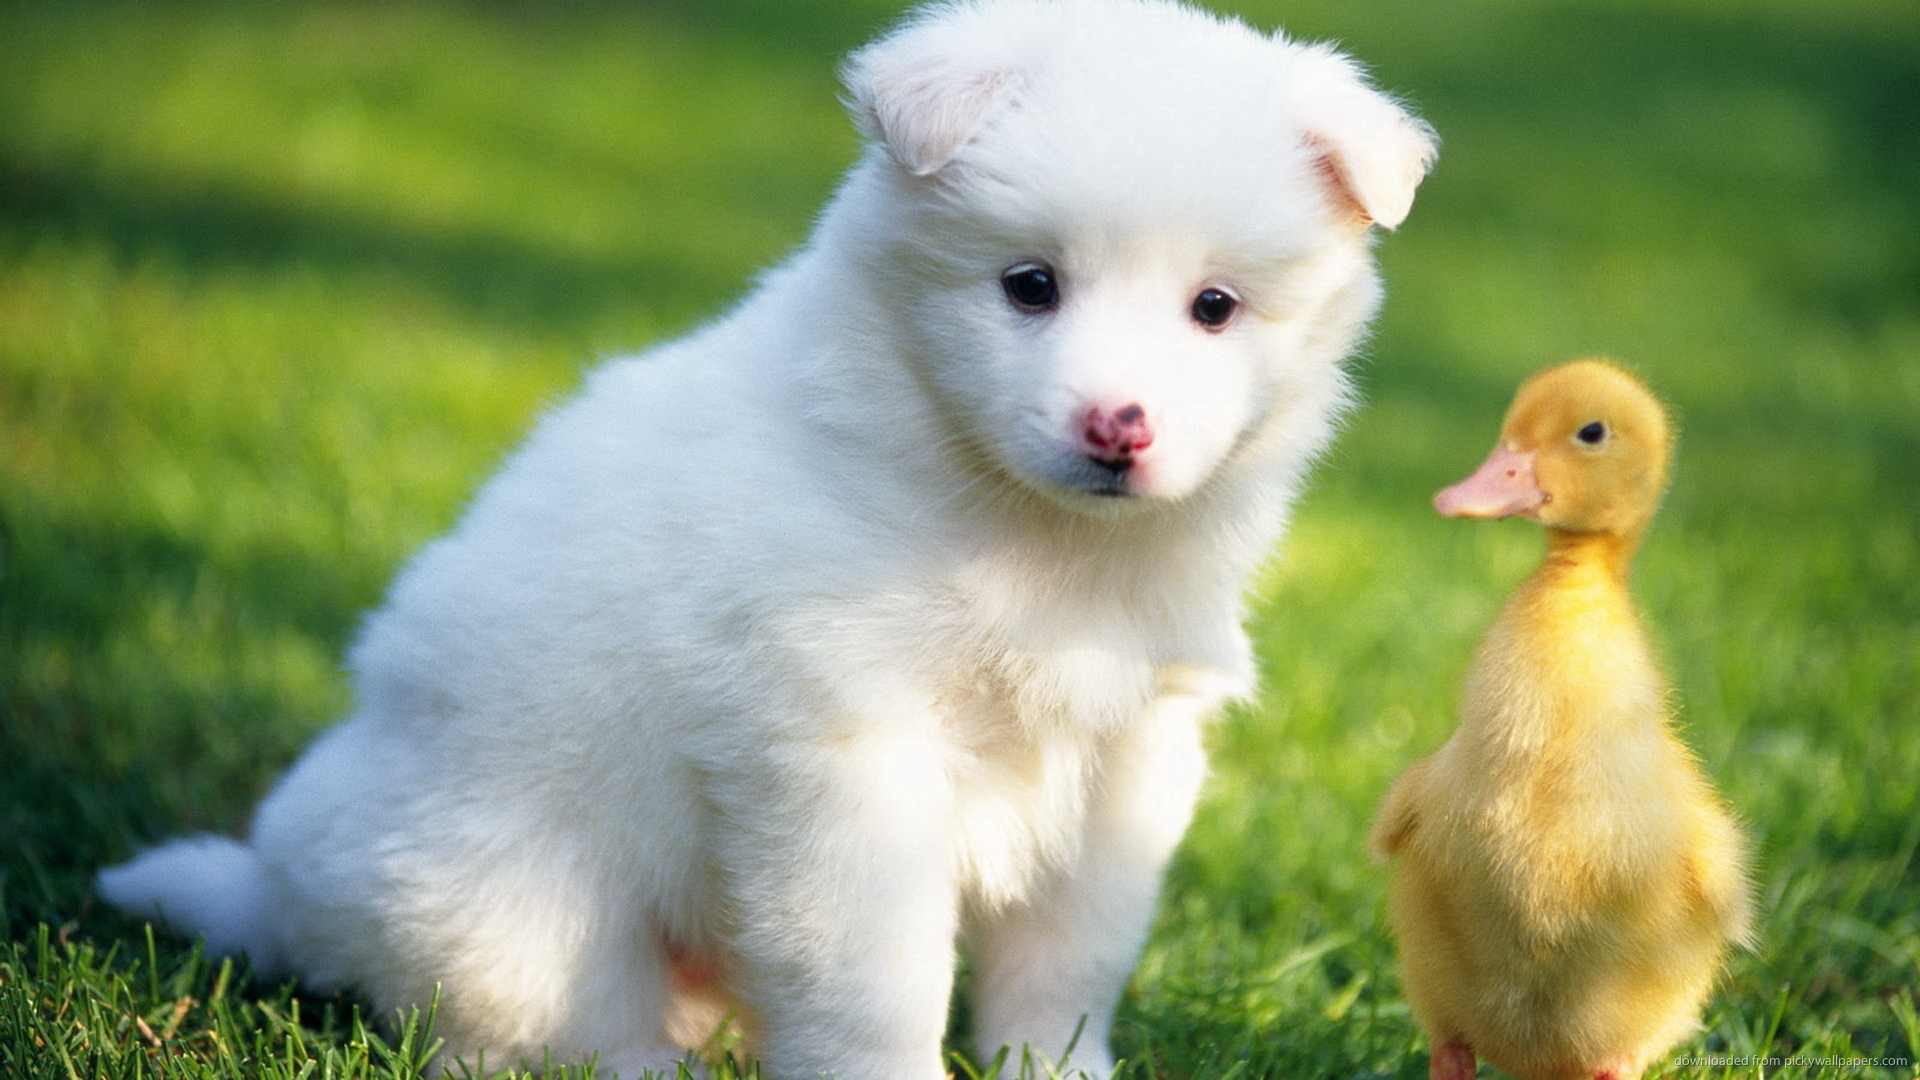 ... Puppy and a duckling for 1920x1080